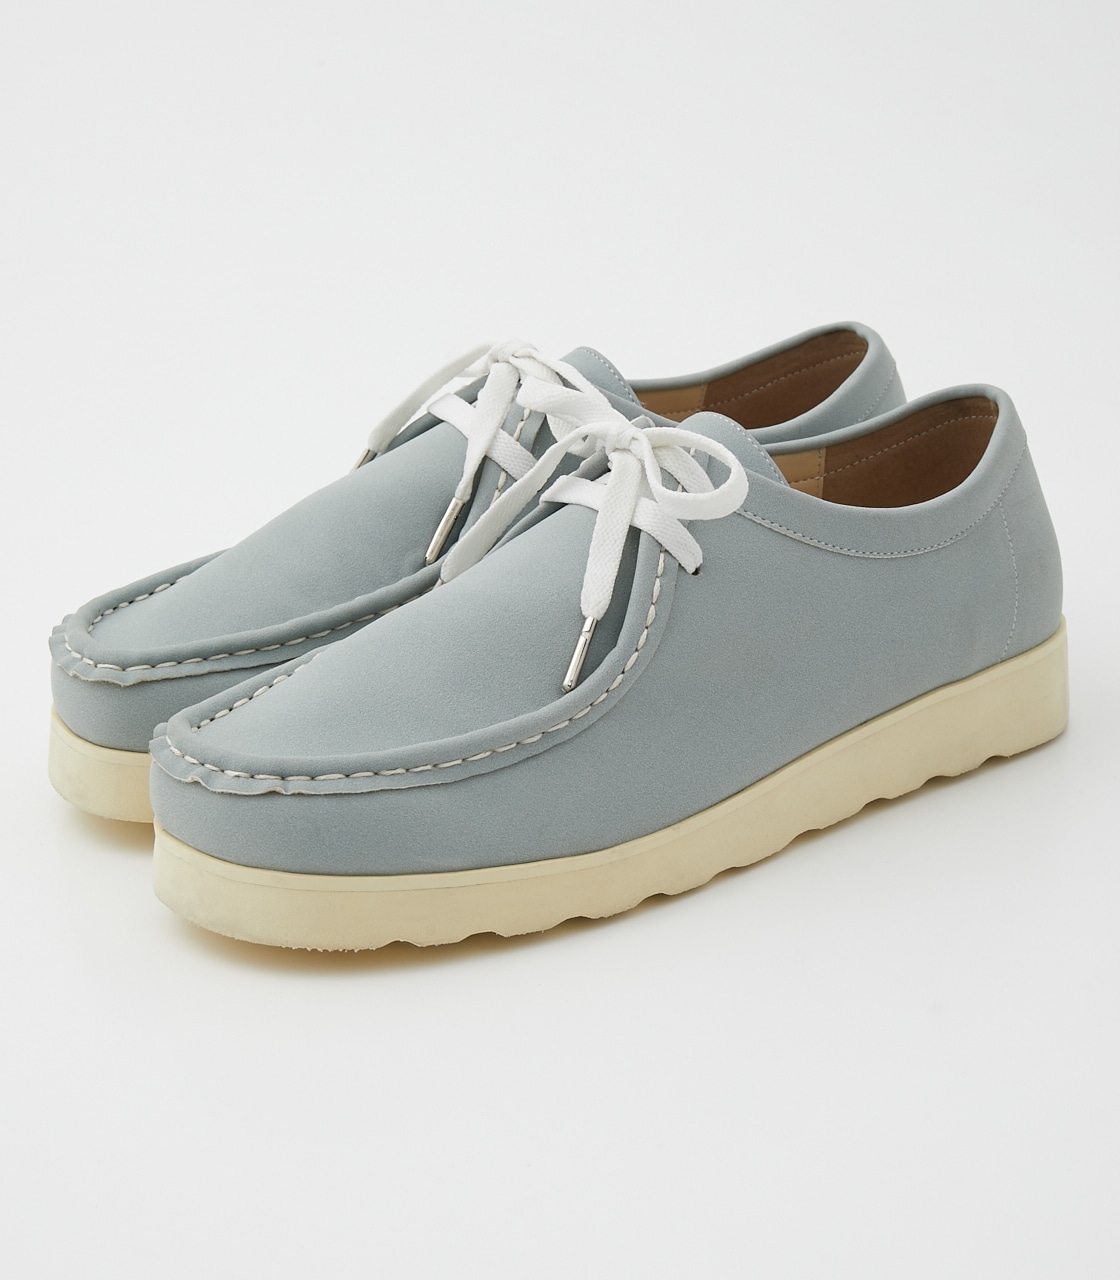 FAUX SUEDE MOCCASIN/フェイクスエードモカシン 詳細画像 L/MINT 1